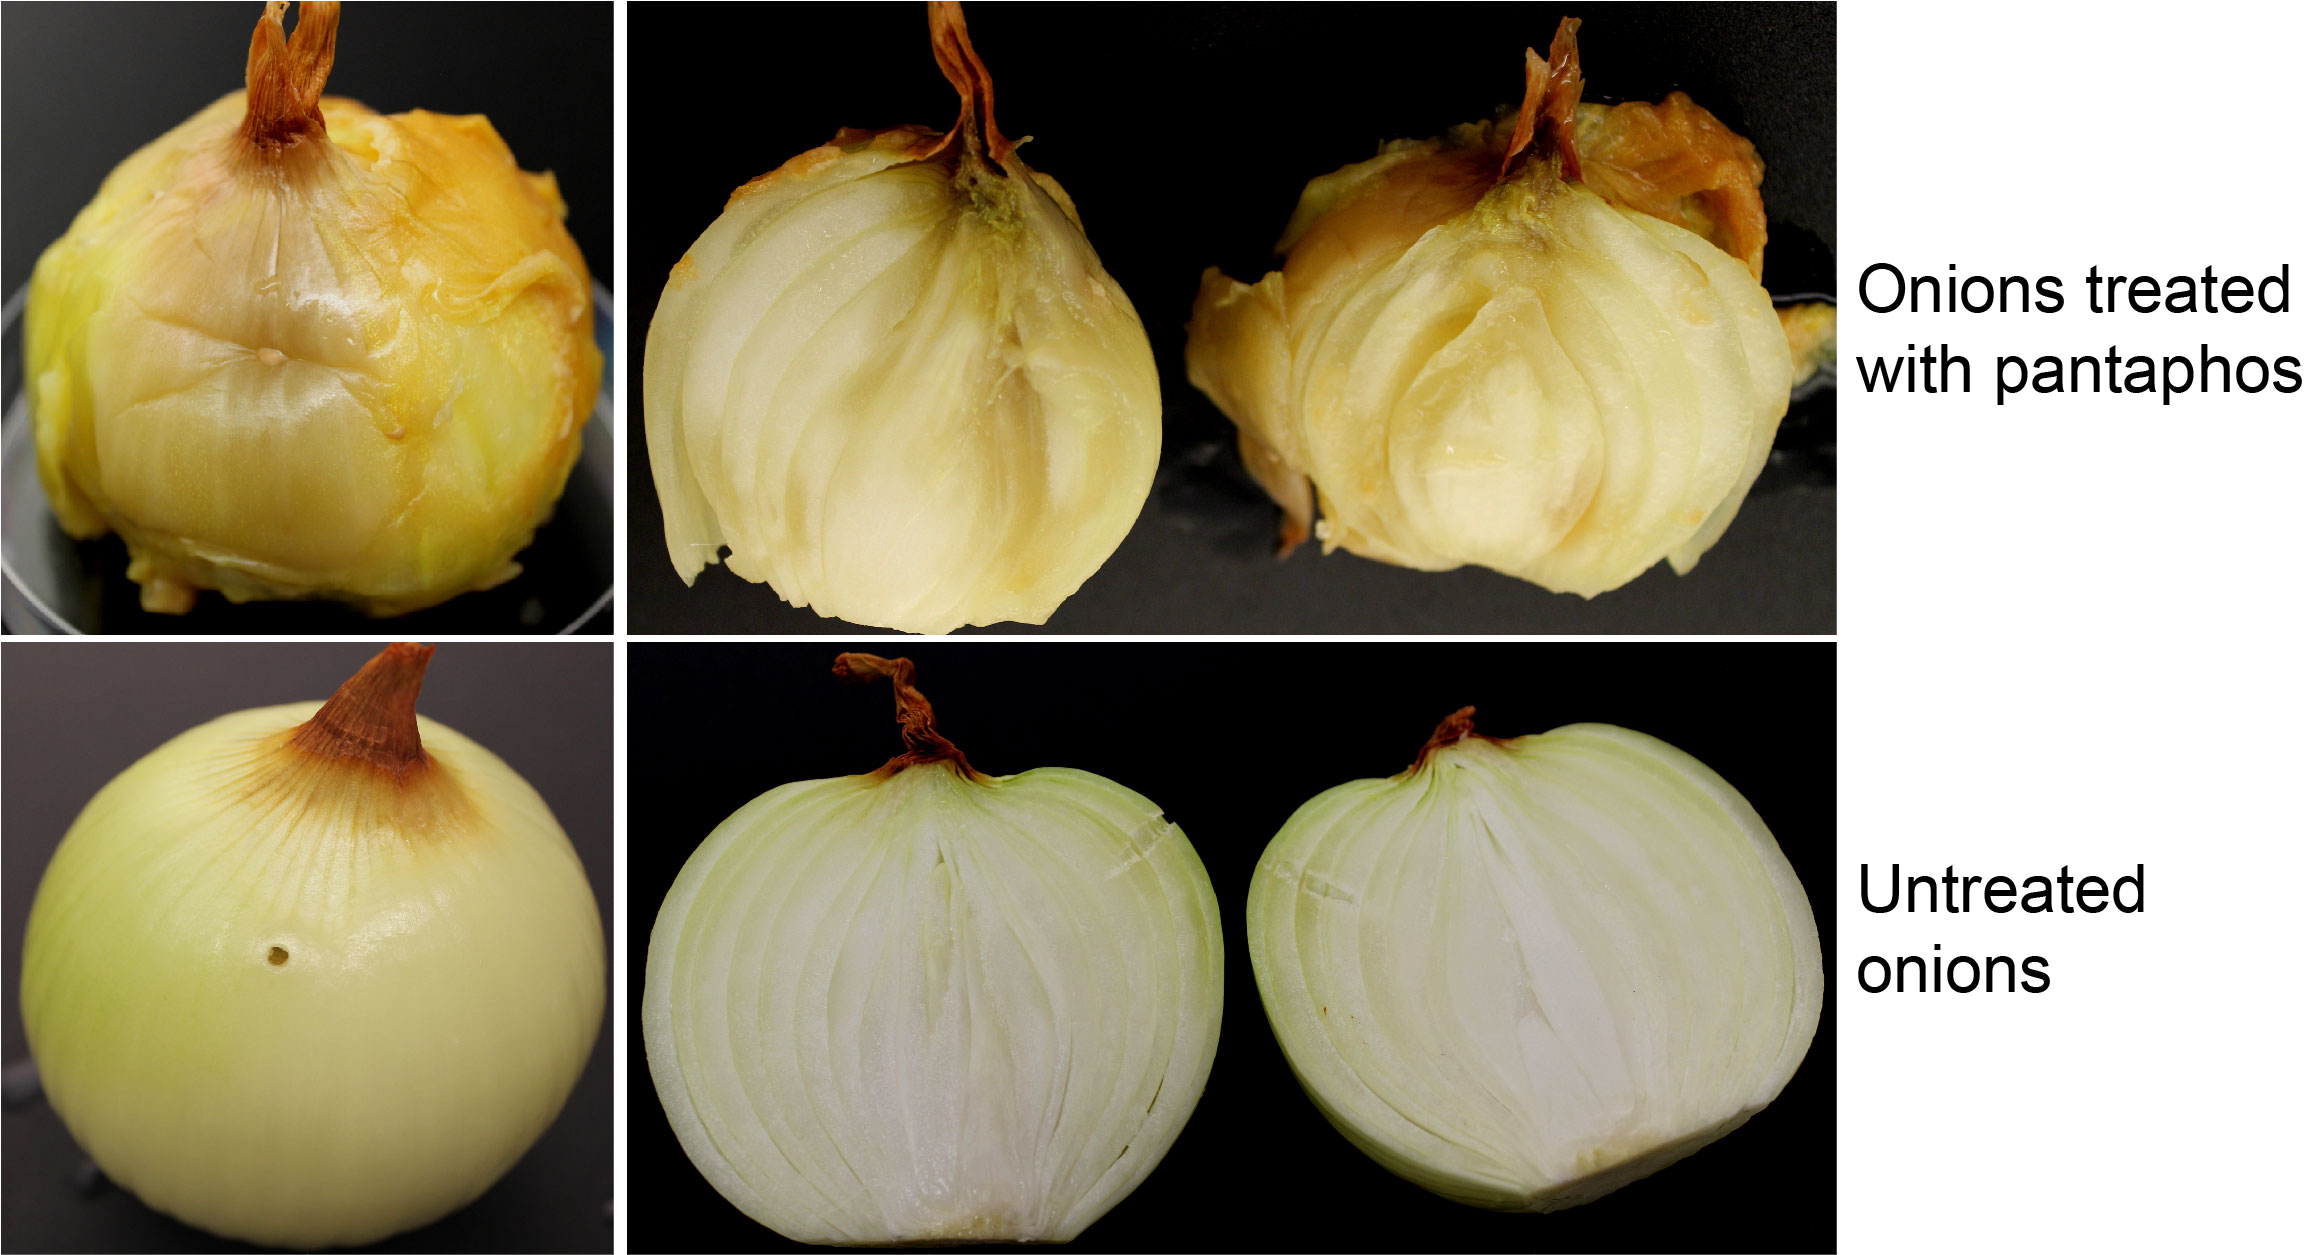 Chart depicting stages of rotten onions treated with pantaphos and untreated onions.